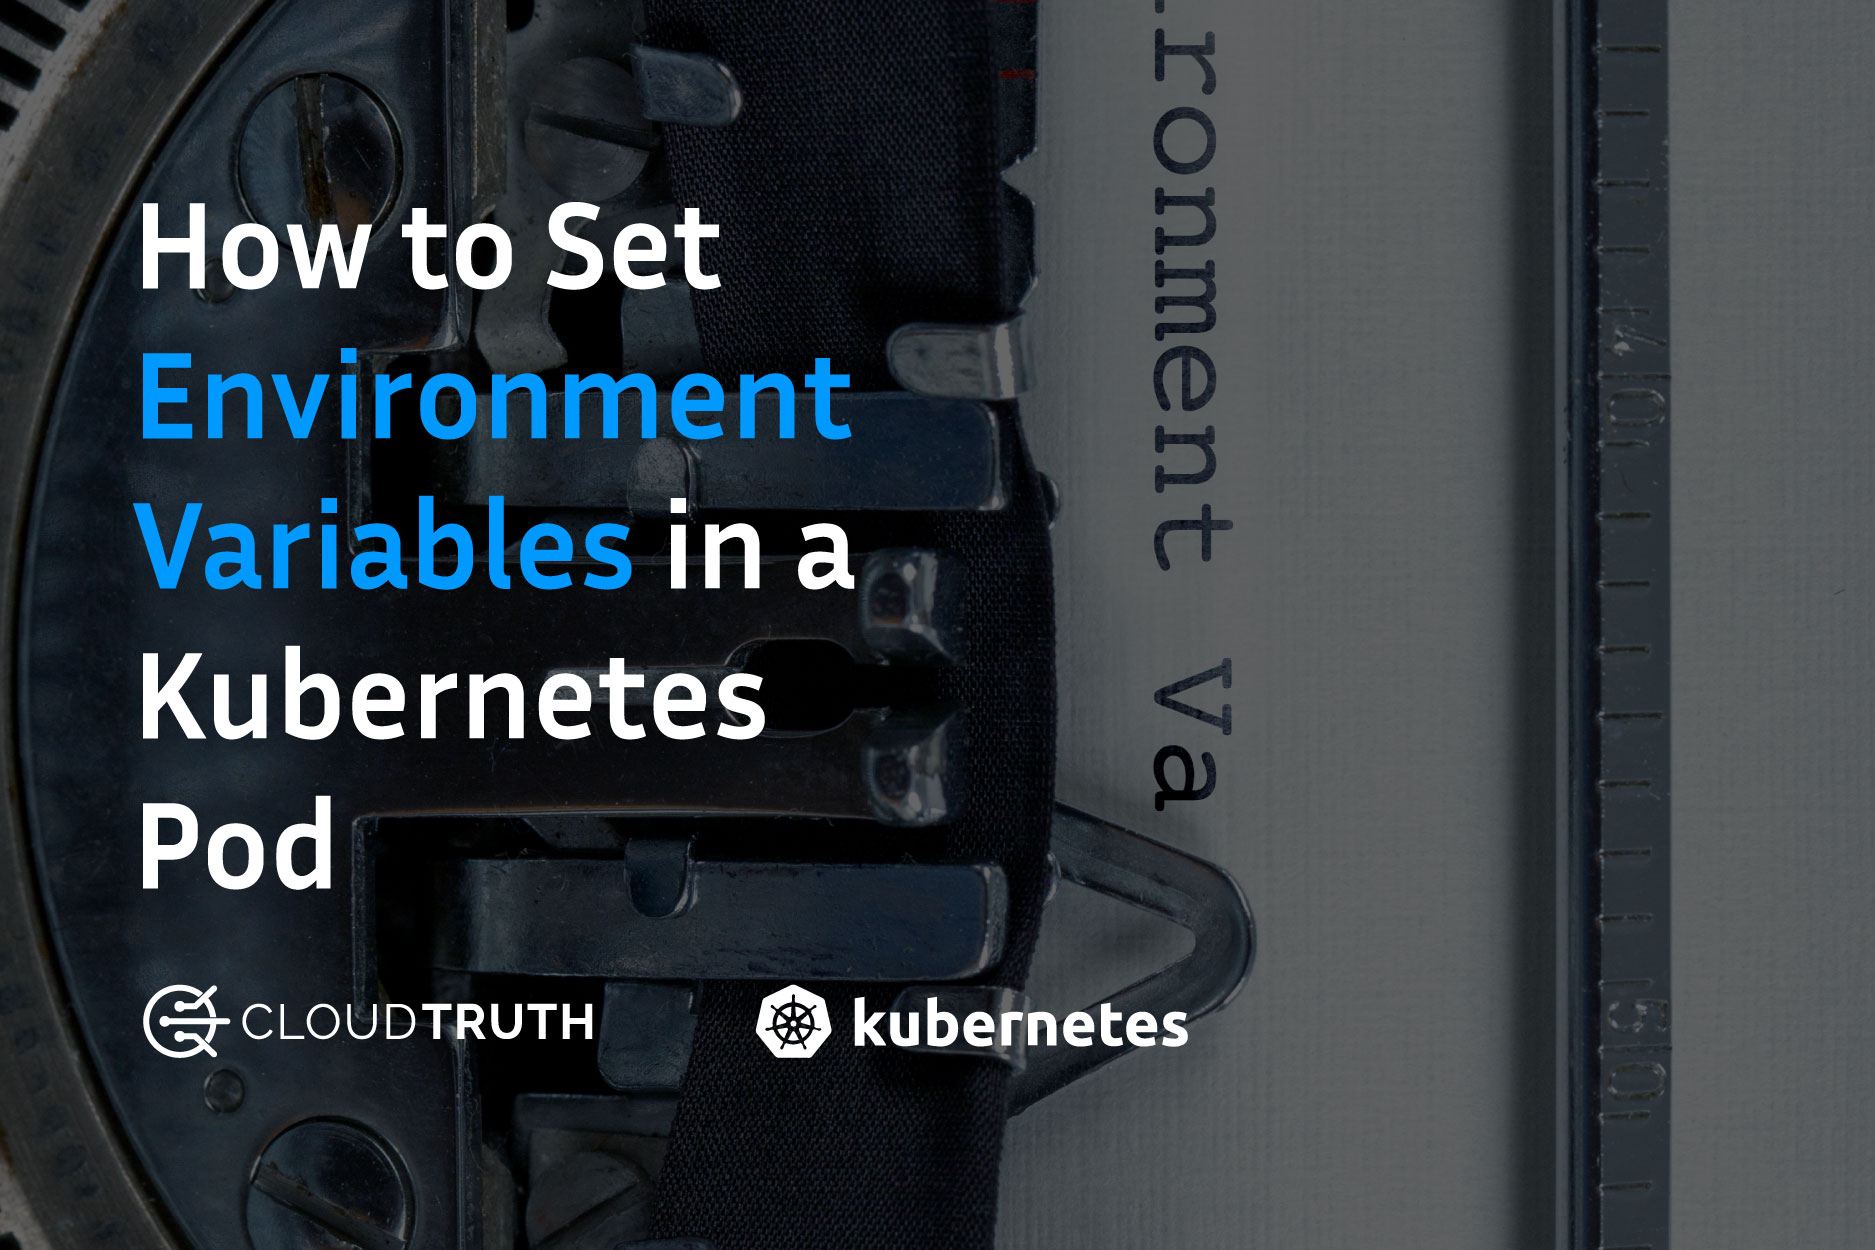 How to Set Environment Variables in a Kubernetes Pod